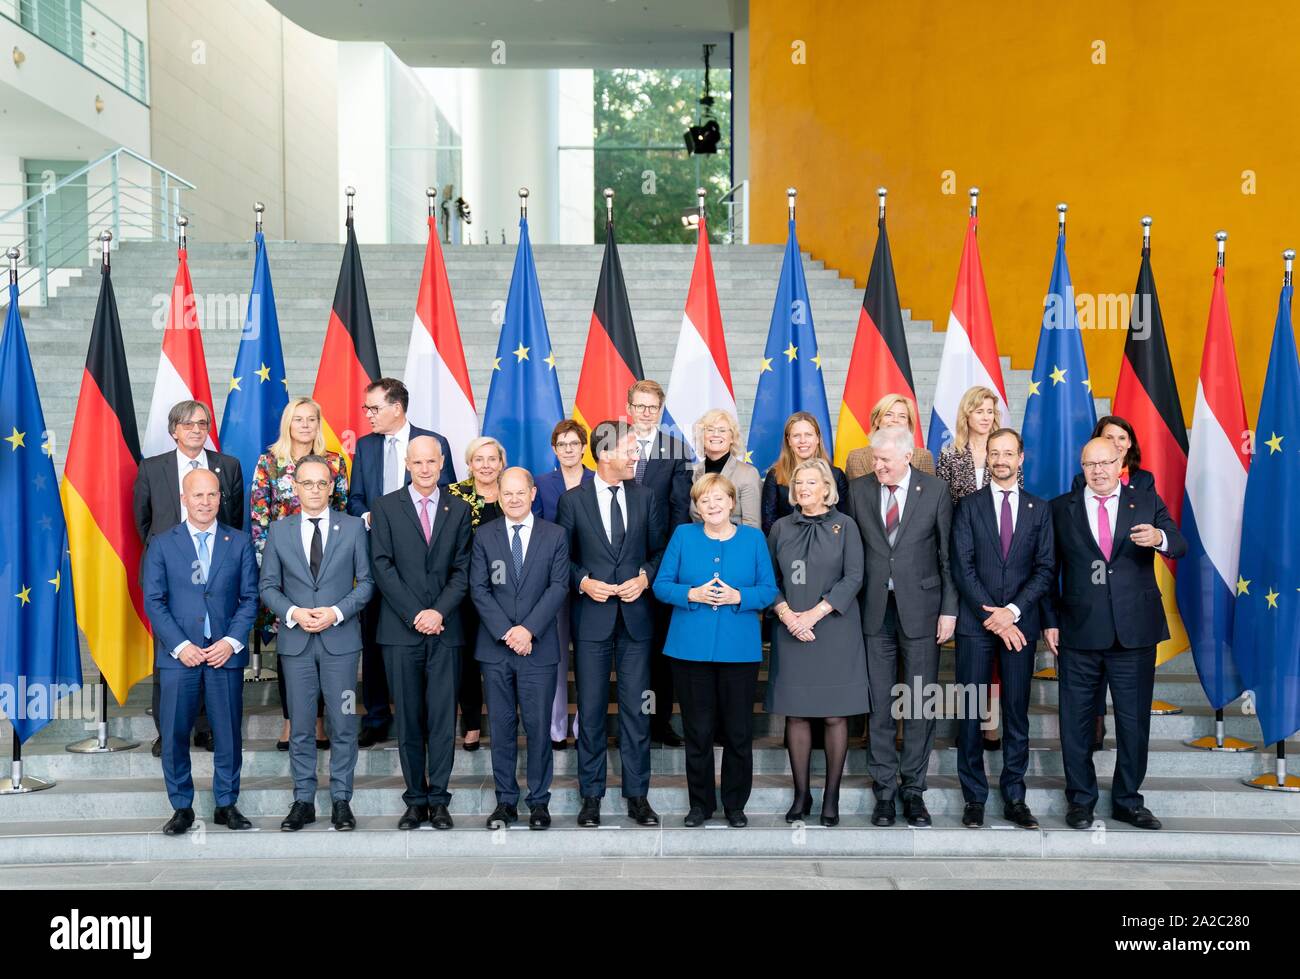 02 October 2019, Berlin: Altmaier (CDU), Federal Minister of Economics and Energy, will be together for the family photo at the German-Dutch government consultations at the Federal Chancellery. Back row l-r: Dirk Brengelmann, German Ambassador to the Netherlands, Sigrid Kaag, Dutch Development Minister, Gerd Müller (CSU), Federal Minister for Economic Cooperation and Development, Ank Bijleveld, Dutch Defence Minister, Annegret Kramp-Karrenbauer (CDU), Federal Minister of Defence and CDU Chairwoman, Sander Dekker, Dutch Minister of Justice, Christine Lambrecht (SPD), Federal Minister of Justice Stock Photo